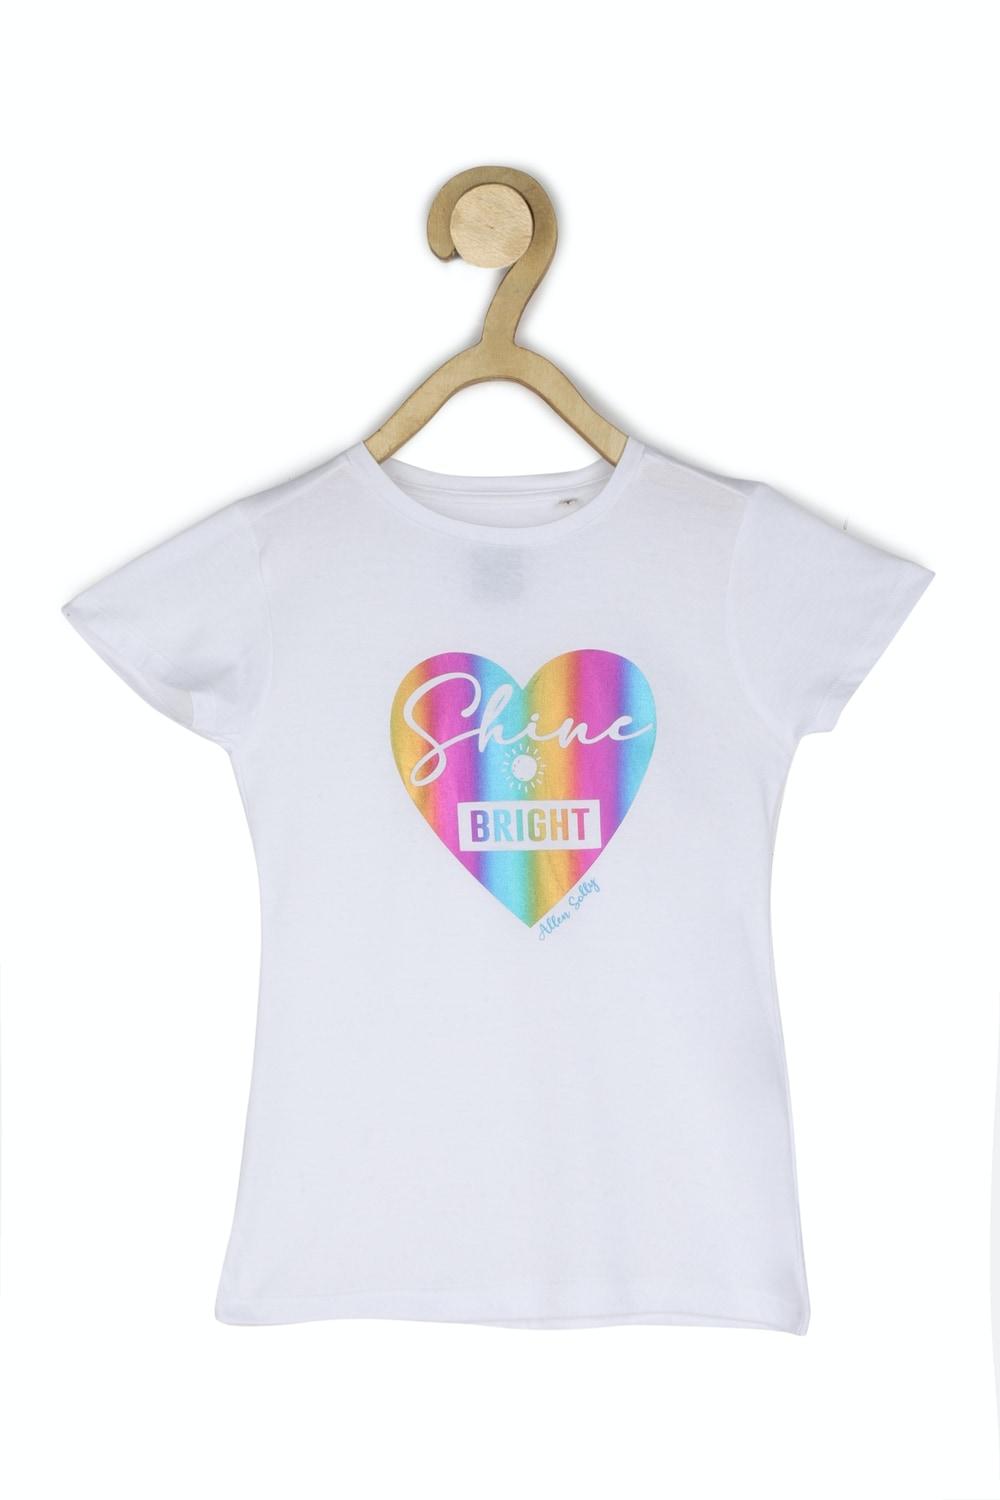 Girls White Graphic Print Casual Tshirt By Allen Solly